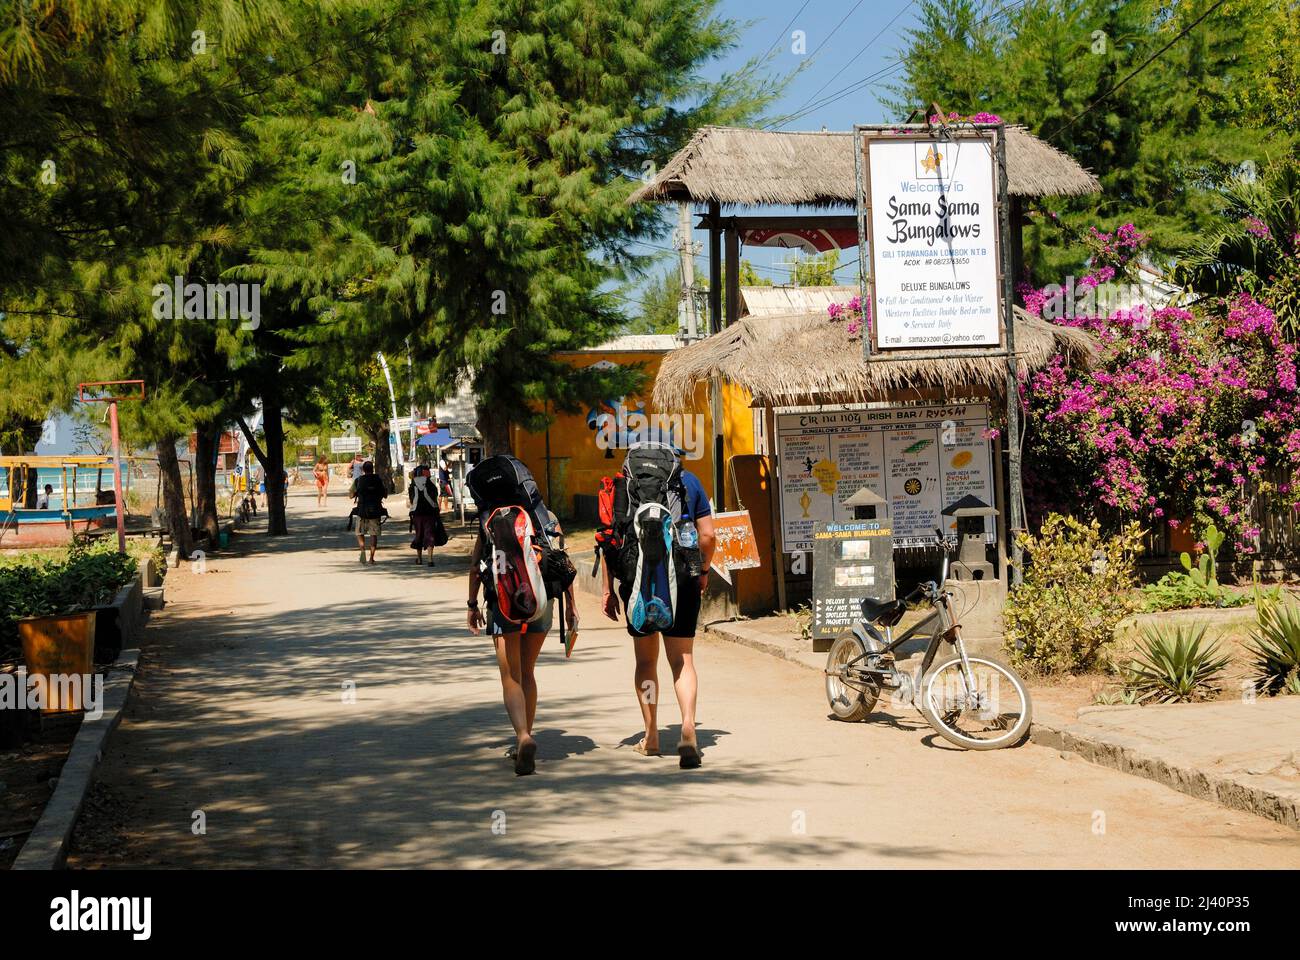 Backpacks search for accommodation on Gili Trawangan, which has no cars. Stock Photo